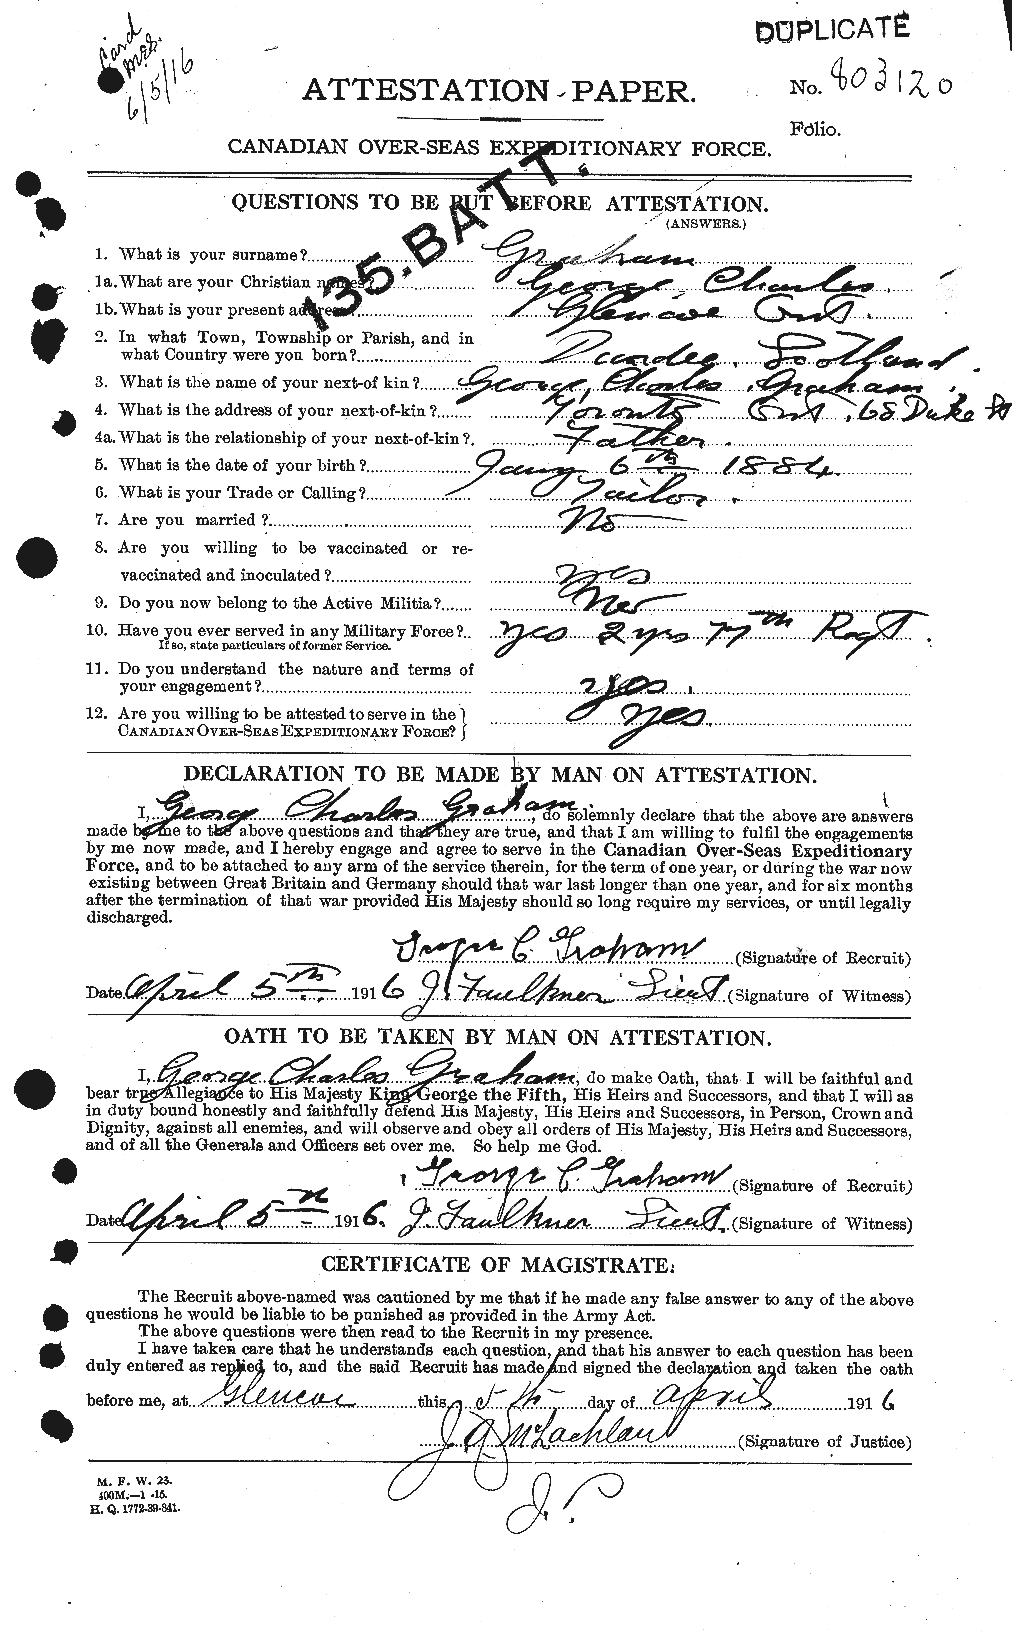 Personnel Records of the First World War - CEF 357649a